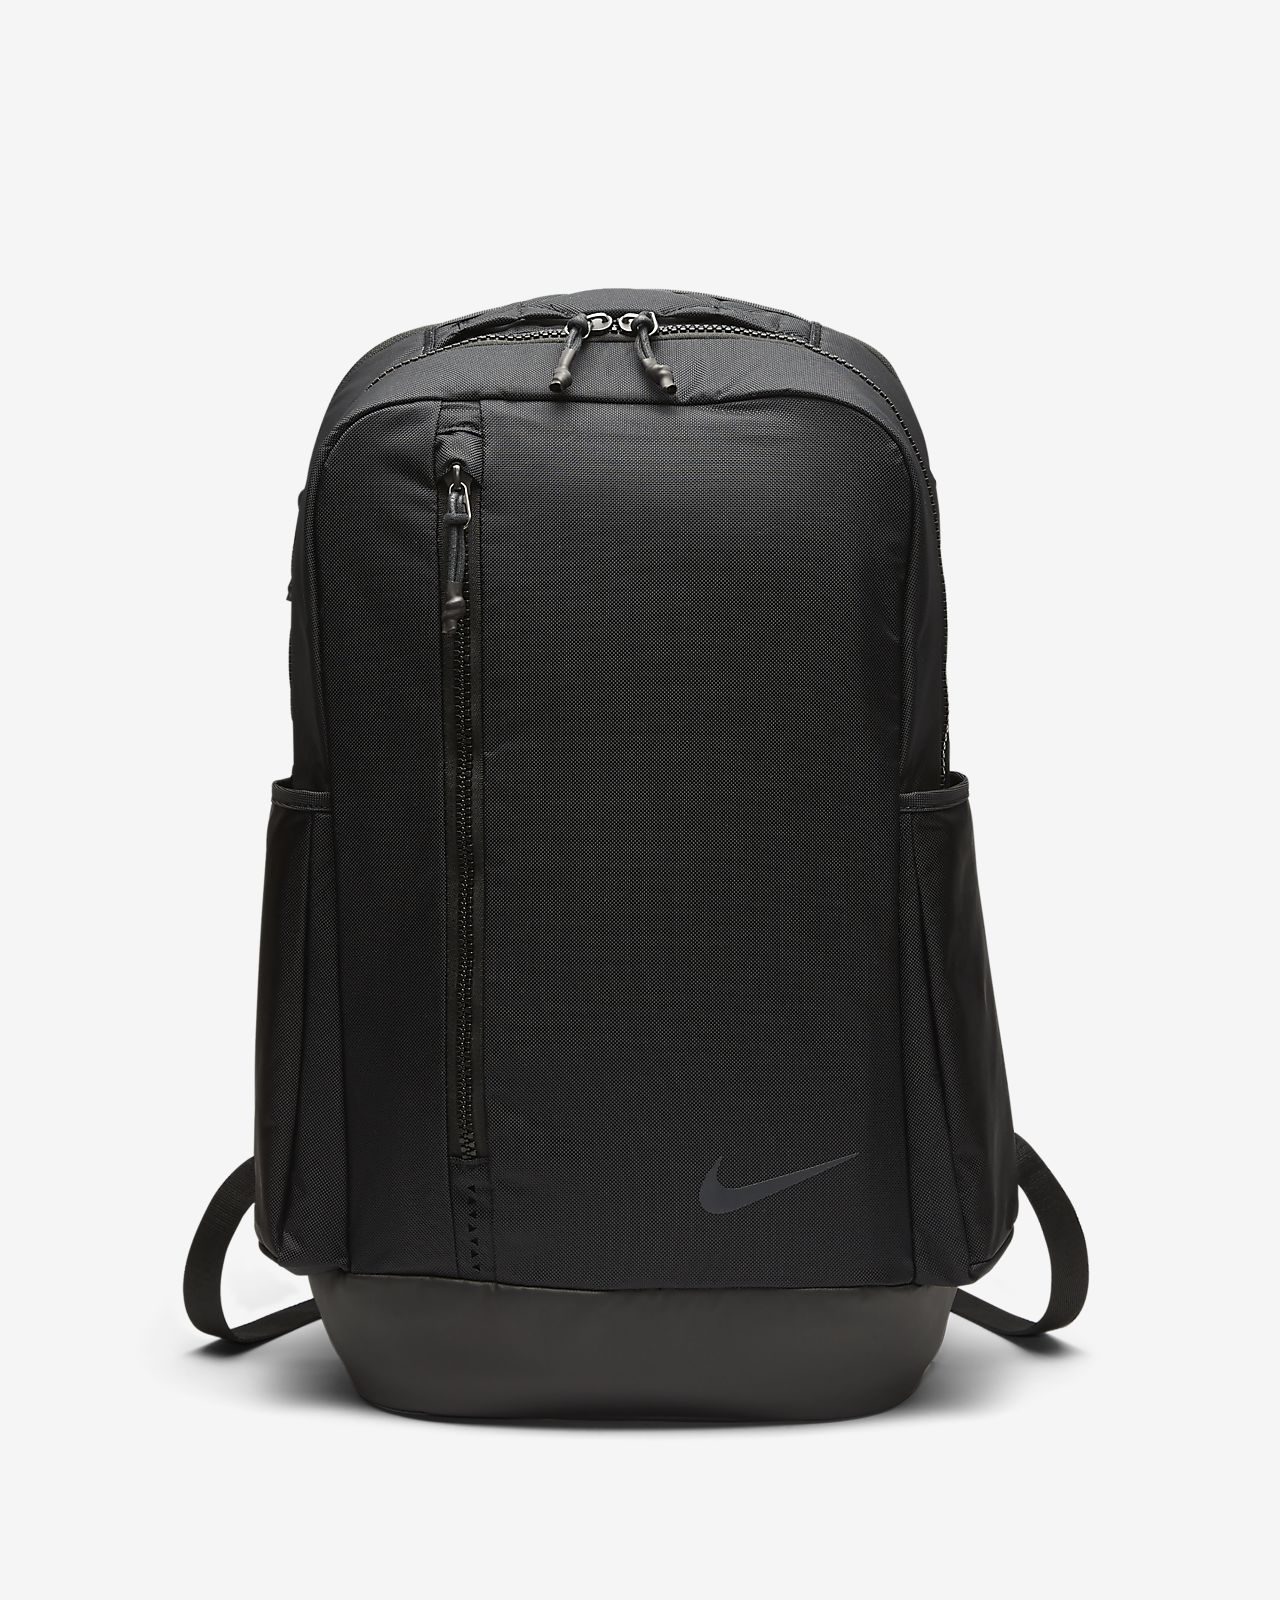 nike bag with shoe compartment